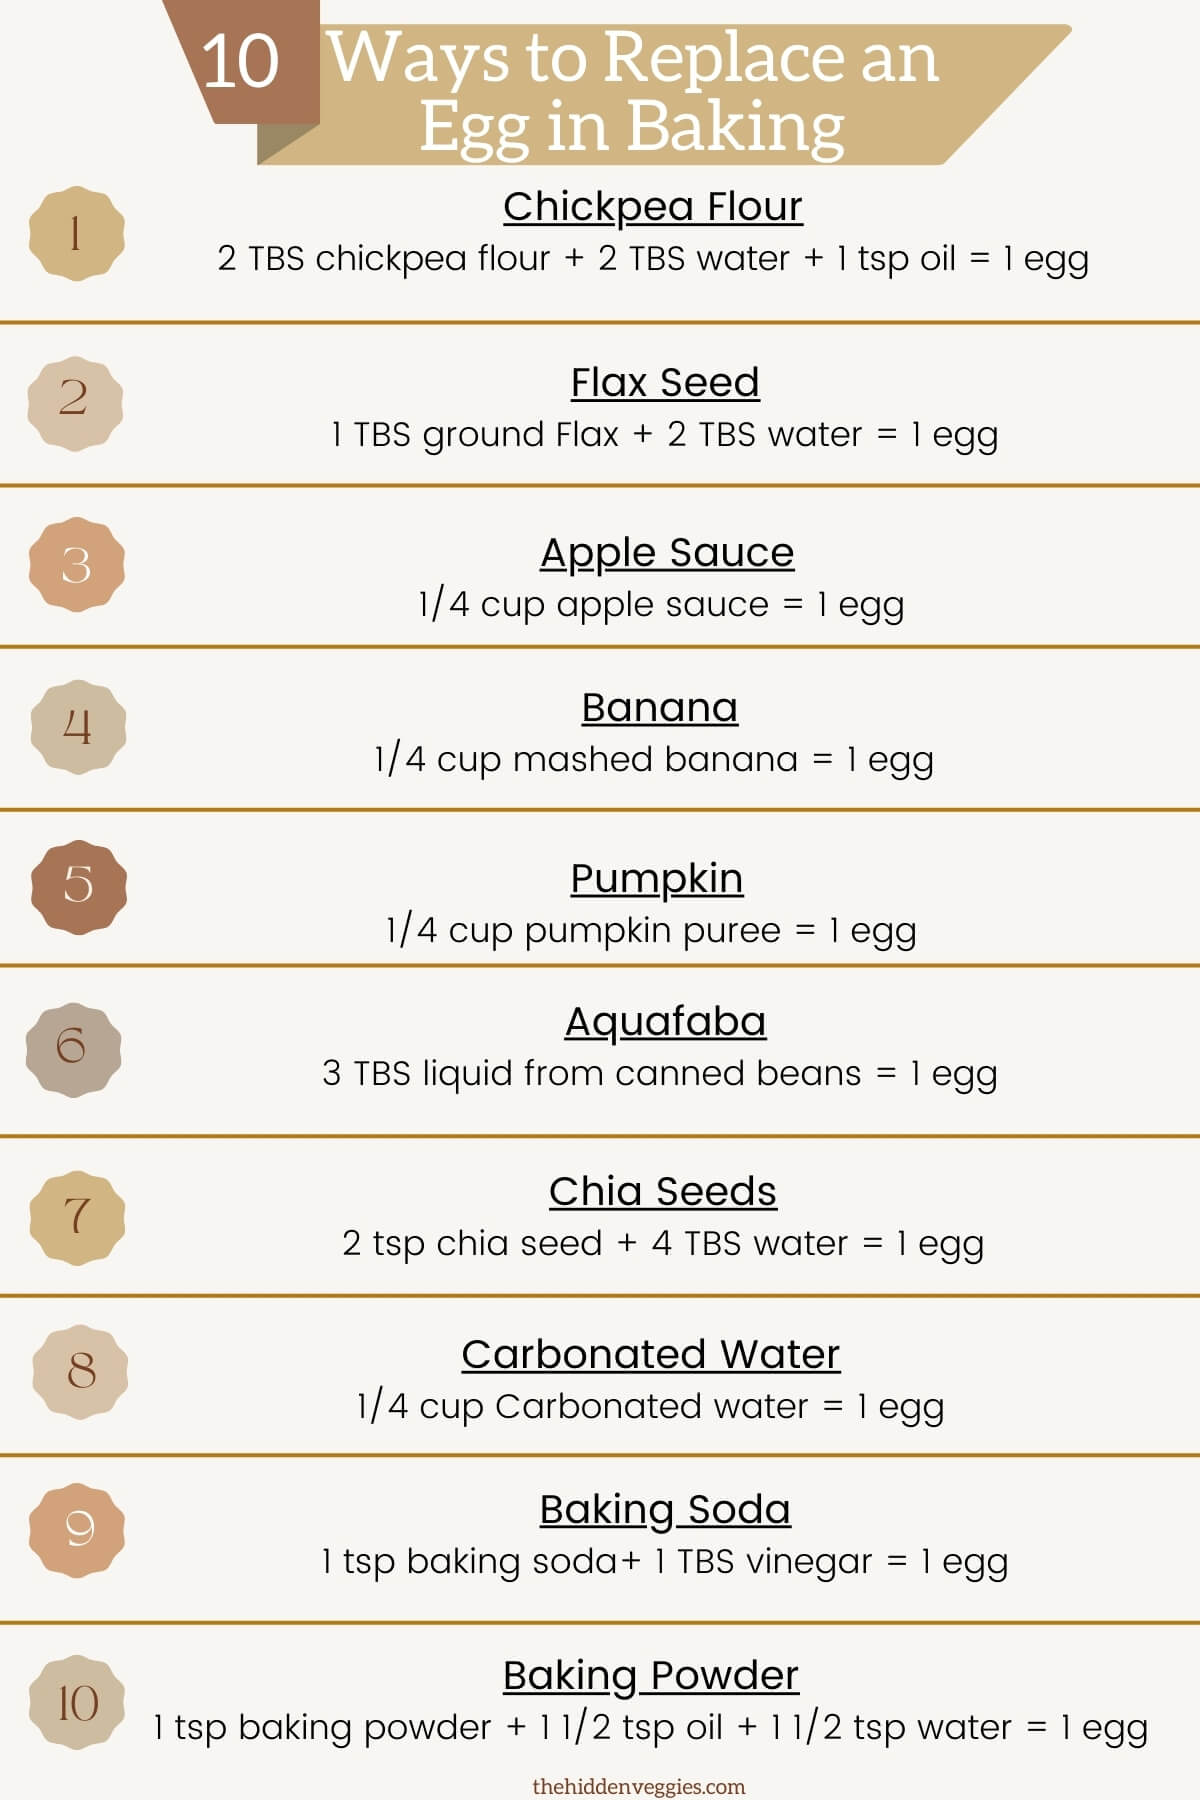 A chart showing 10 things that you can use instead of eggs in baking.